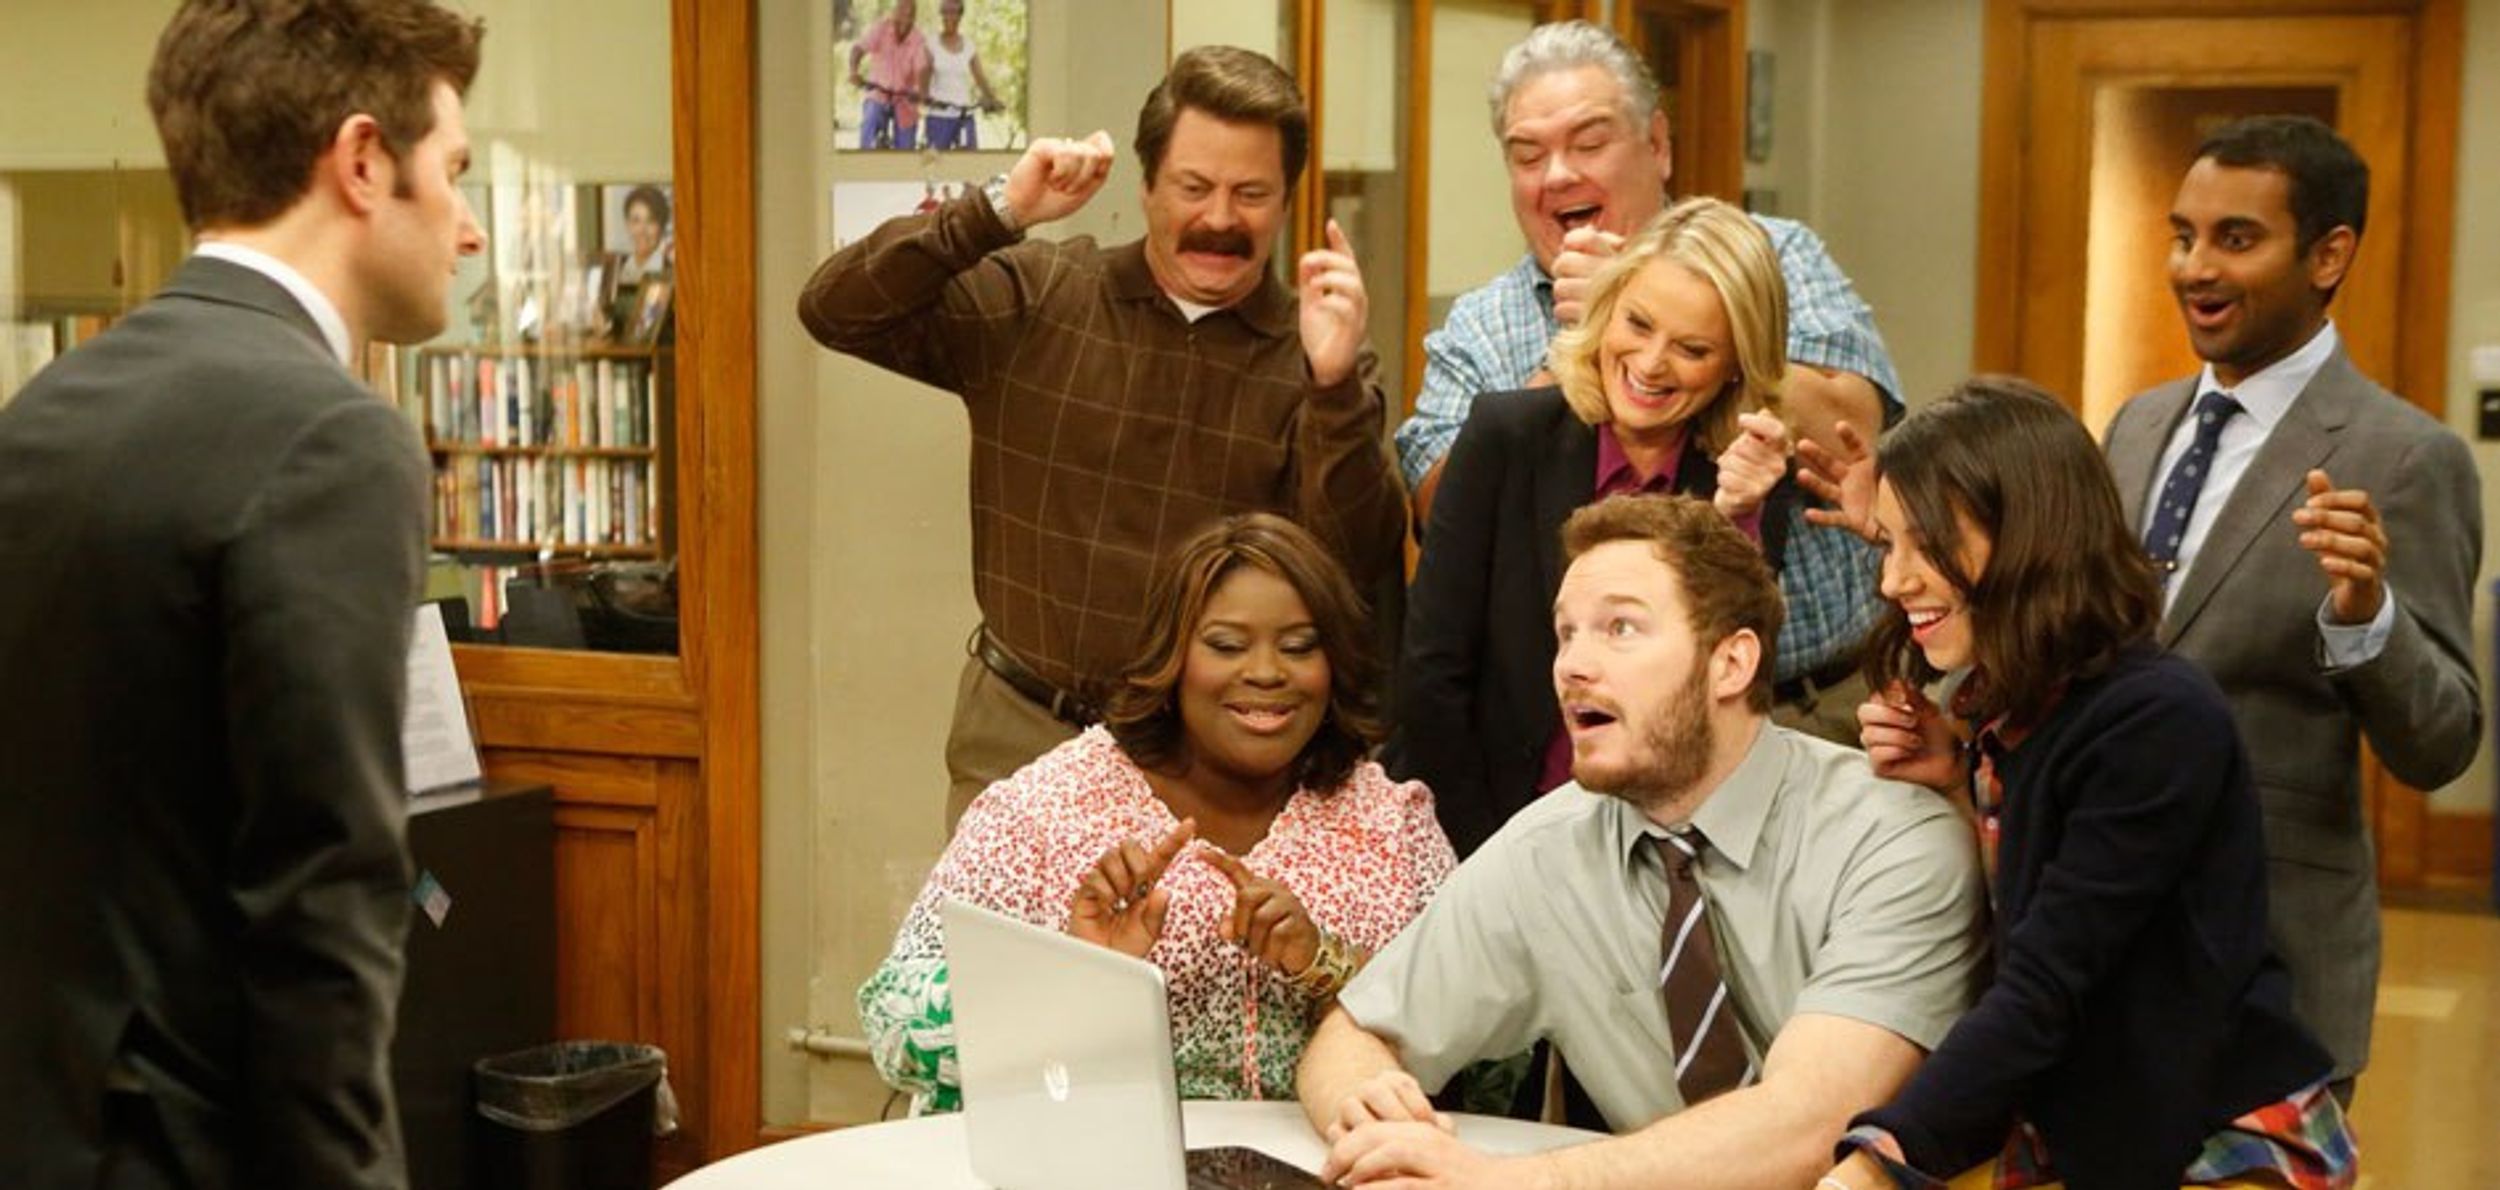 Depression And Anxiety As Told By "Parks And Recreation"